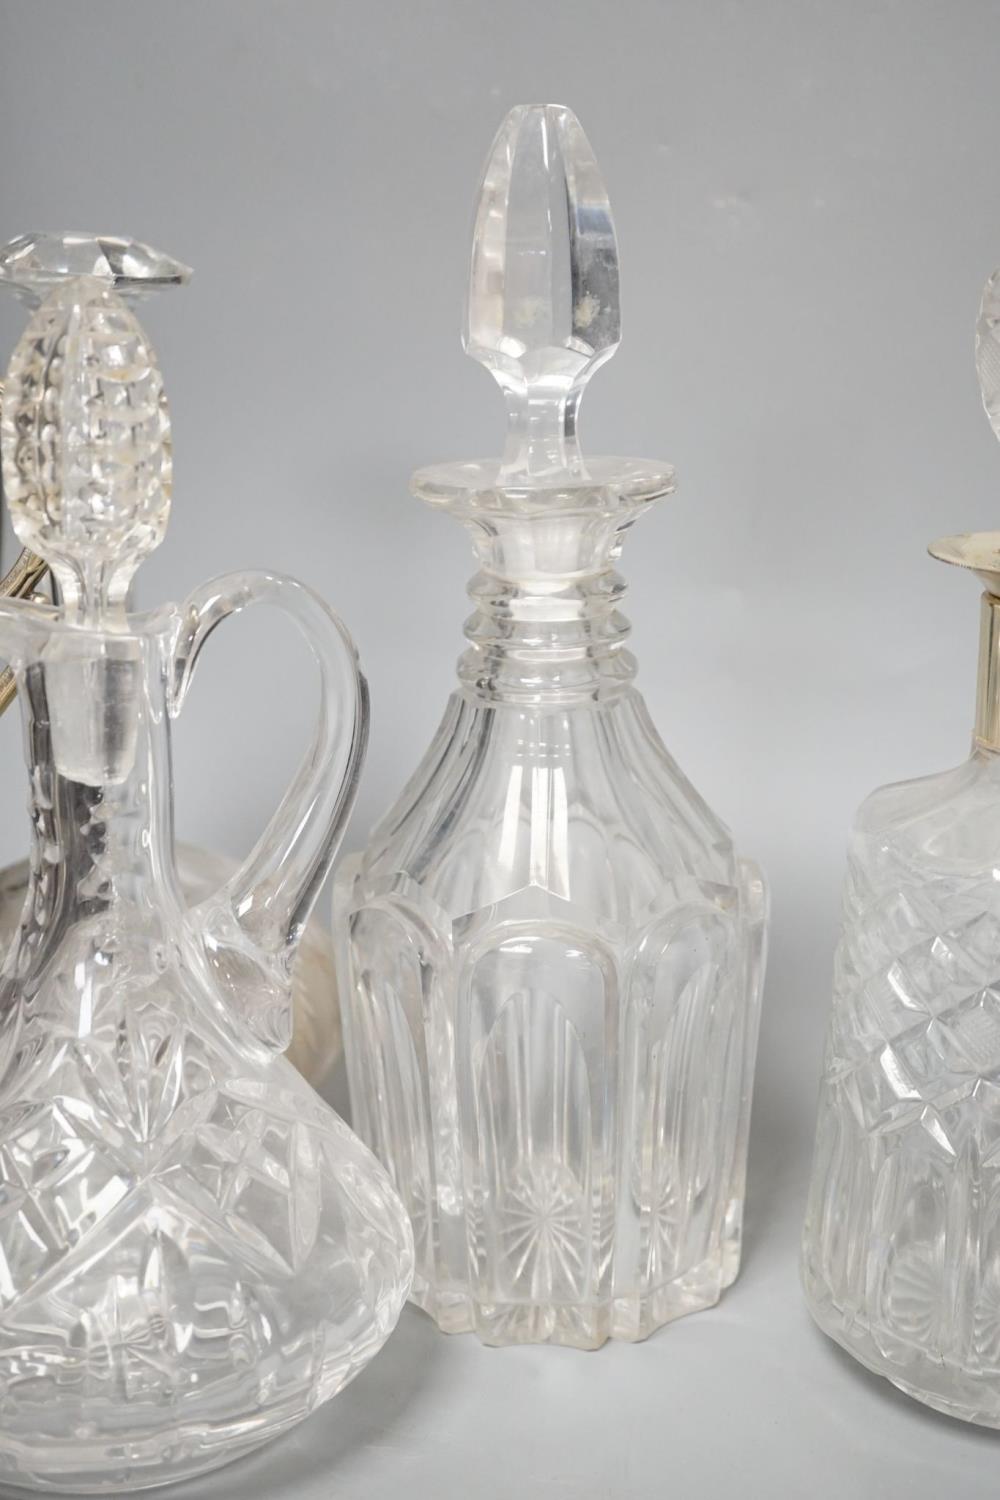 A Hukin and Heath claret jug and other decanters etc. - Image 7 of 9